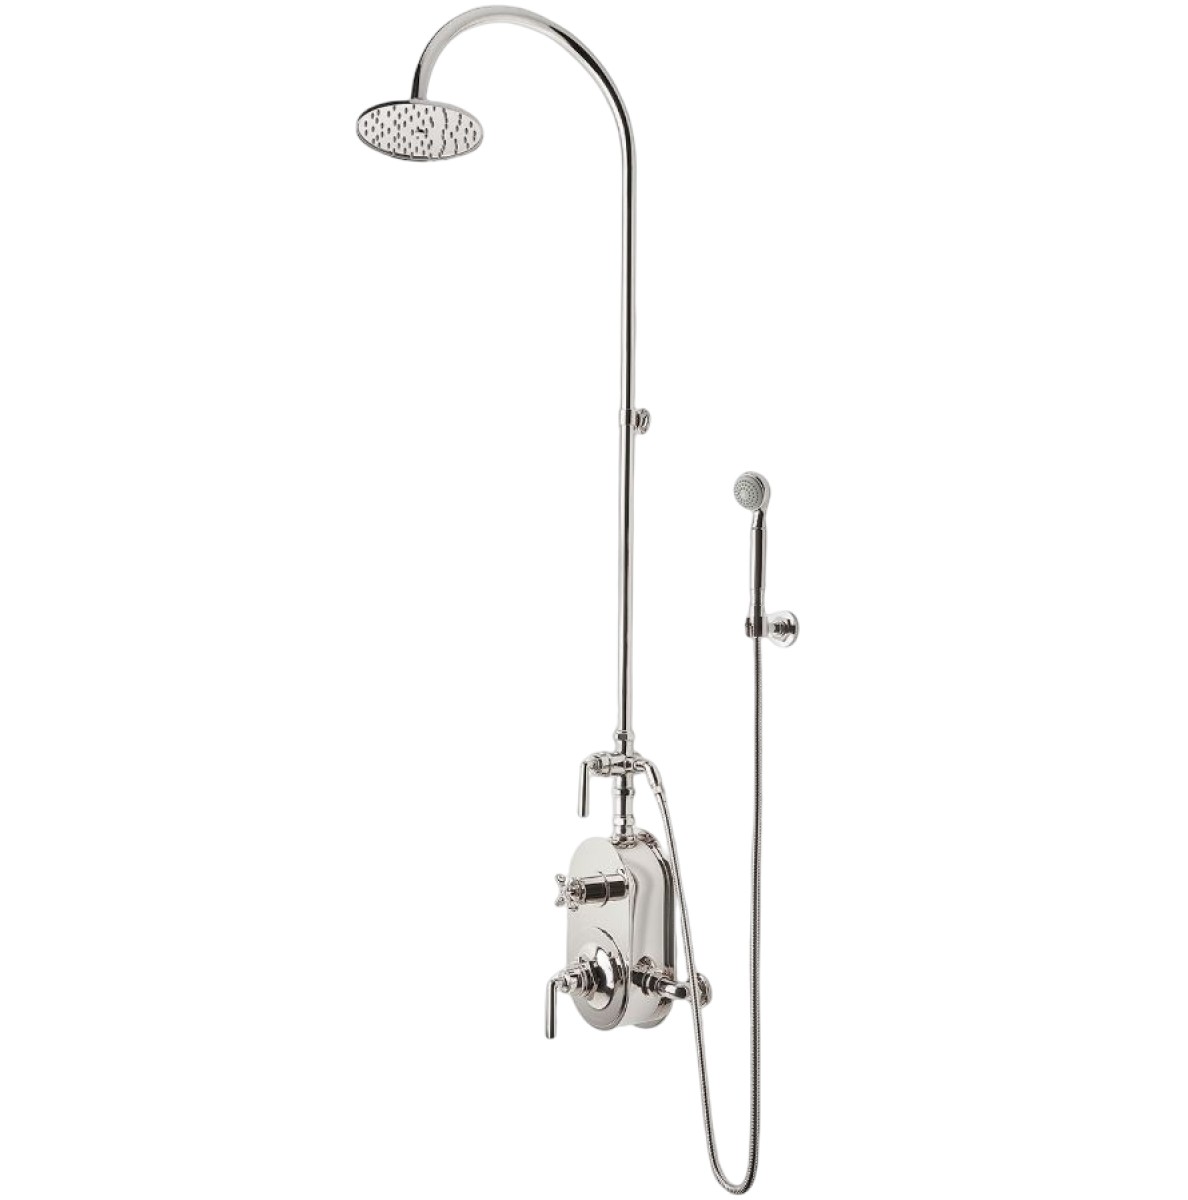 Henry Exposed Thermostatic Shower System with 8" Shower Head, Handshower, Metal Lever Diverter Handle, Metal Lever and Cross Handle